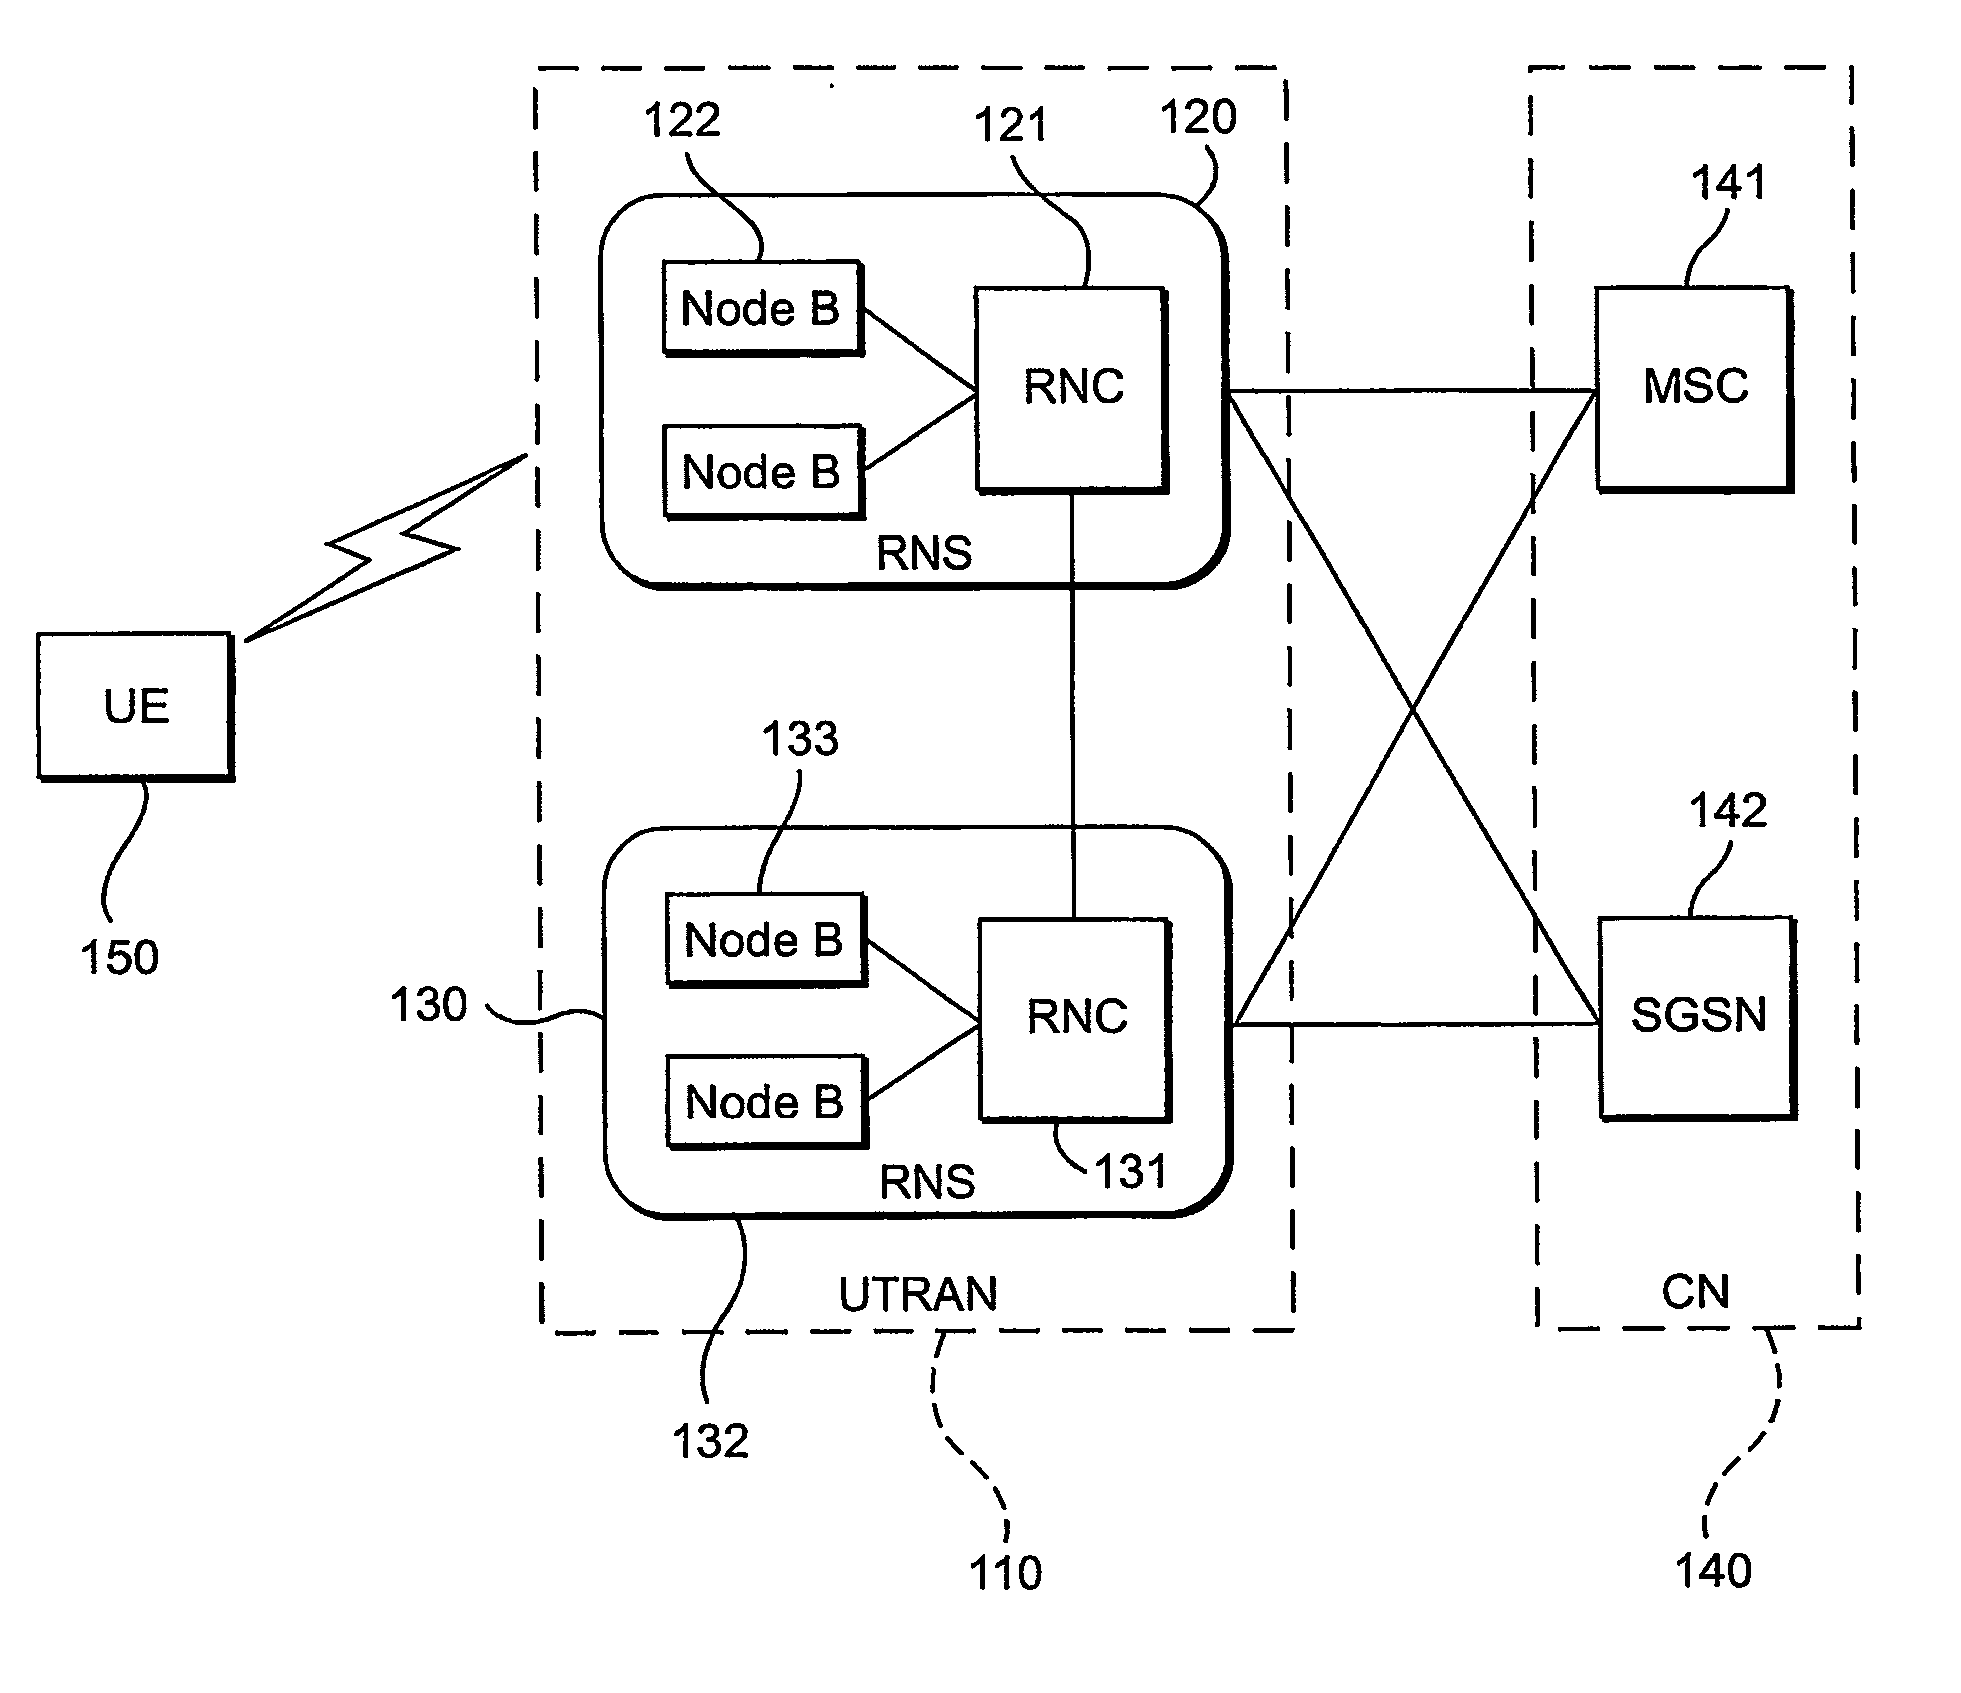 Medium access control priority-based scheduling for data units in a data flow